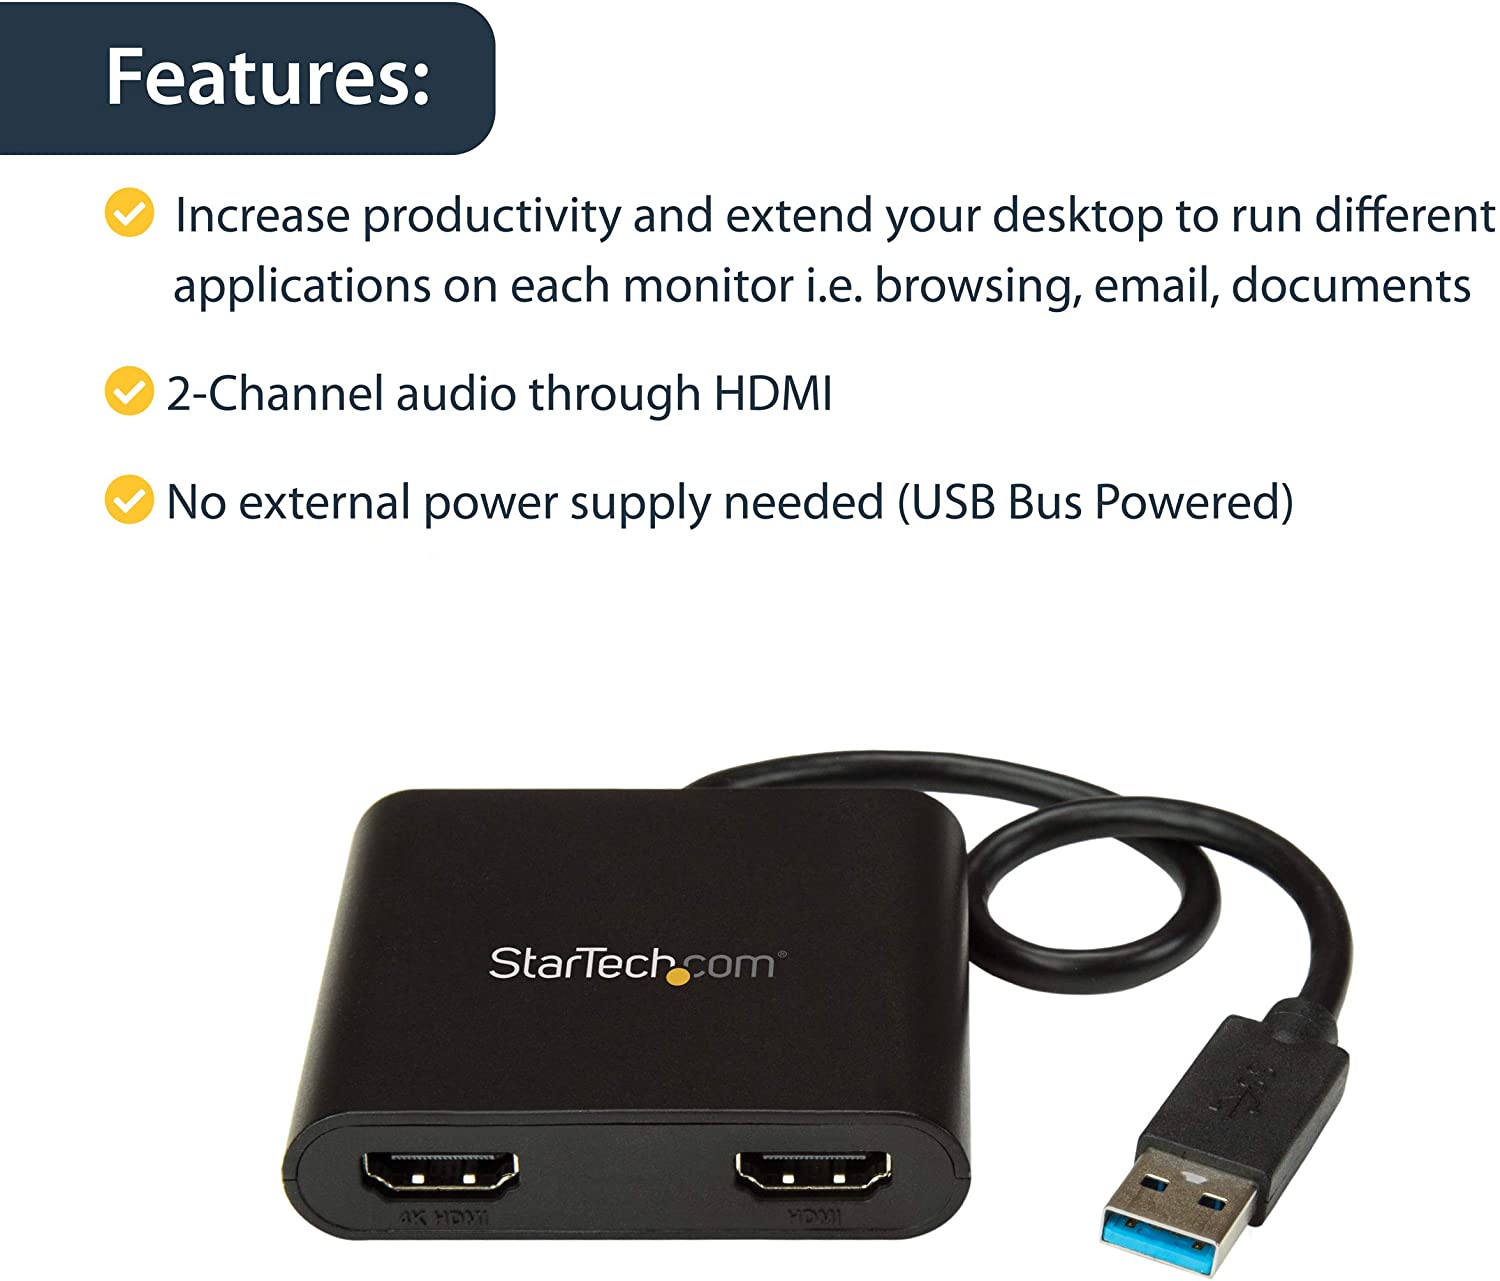 StarTech USB TO HDMI ADAPTER - USB TO DUAL HDMI ADAPTER - USB 3.0 TO HDMI - EXTERNAL VIDEO CARD(USB32HD2) - Win-Pro Consultancy Pte Ltd